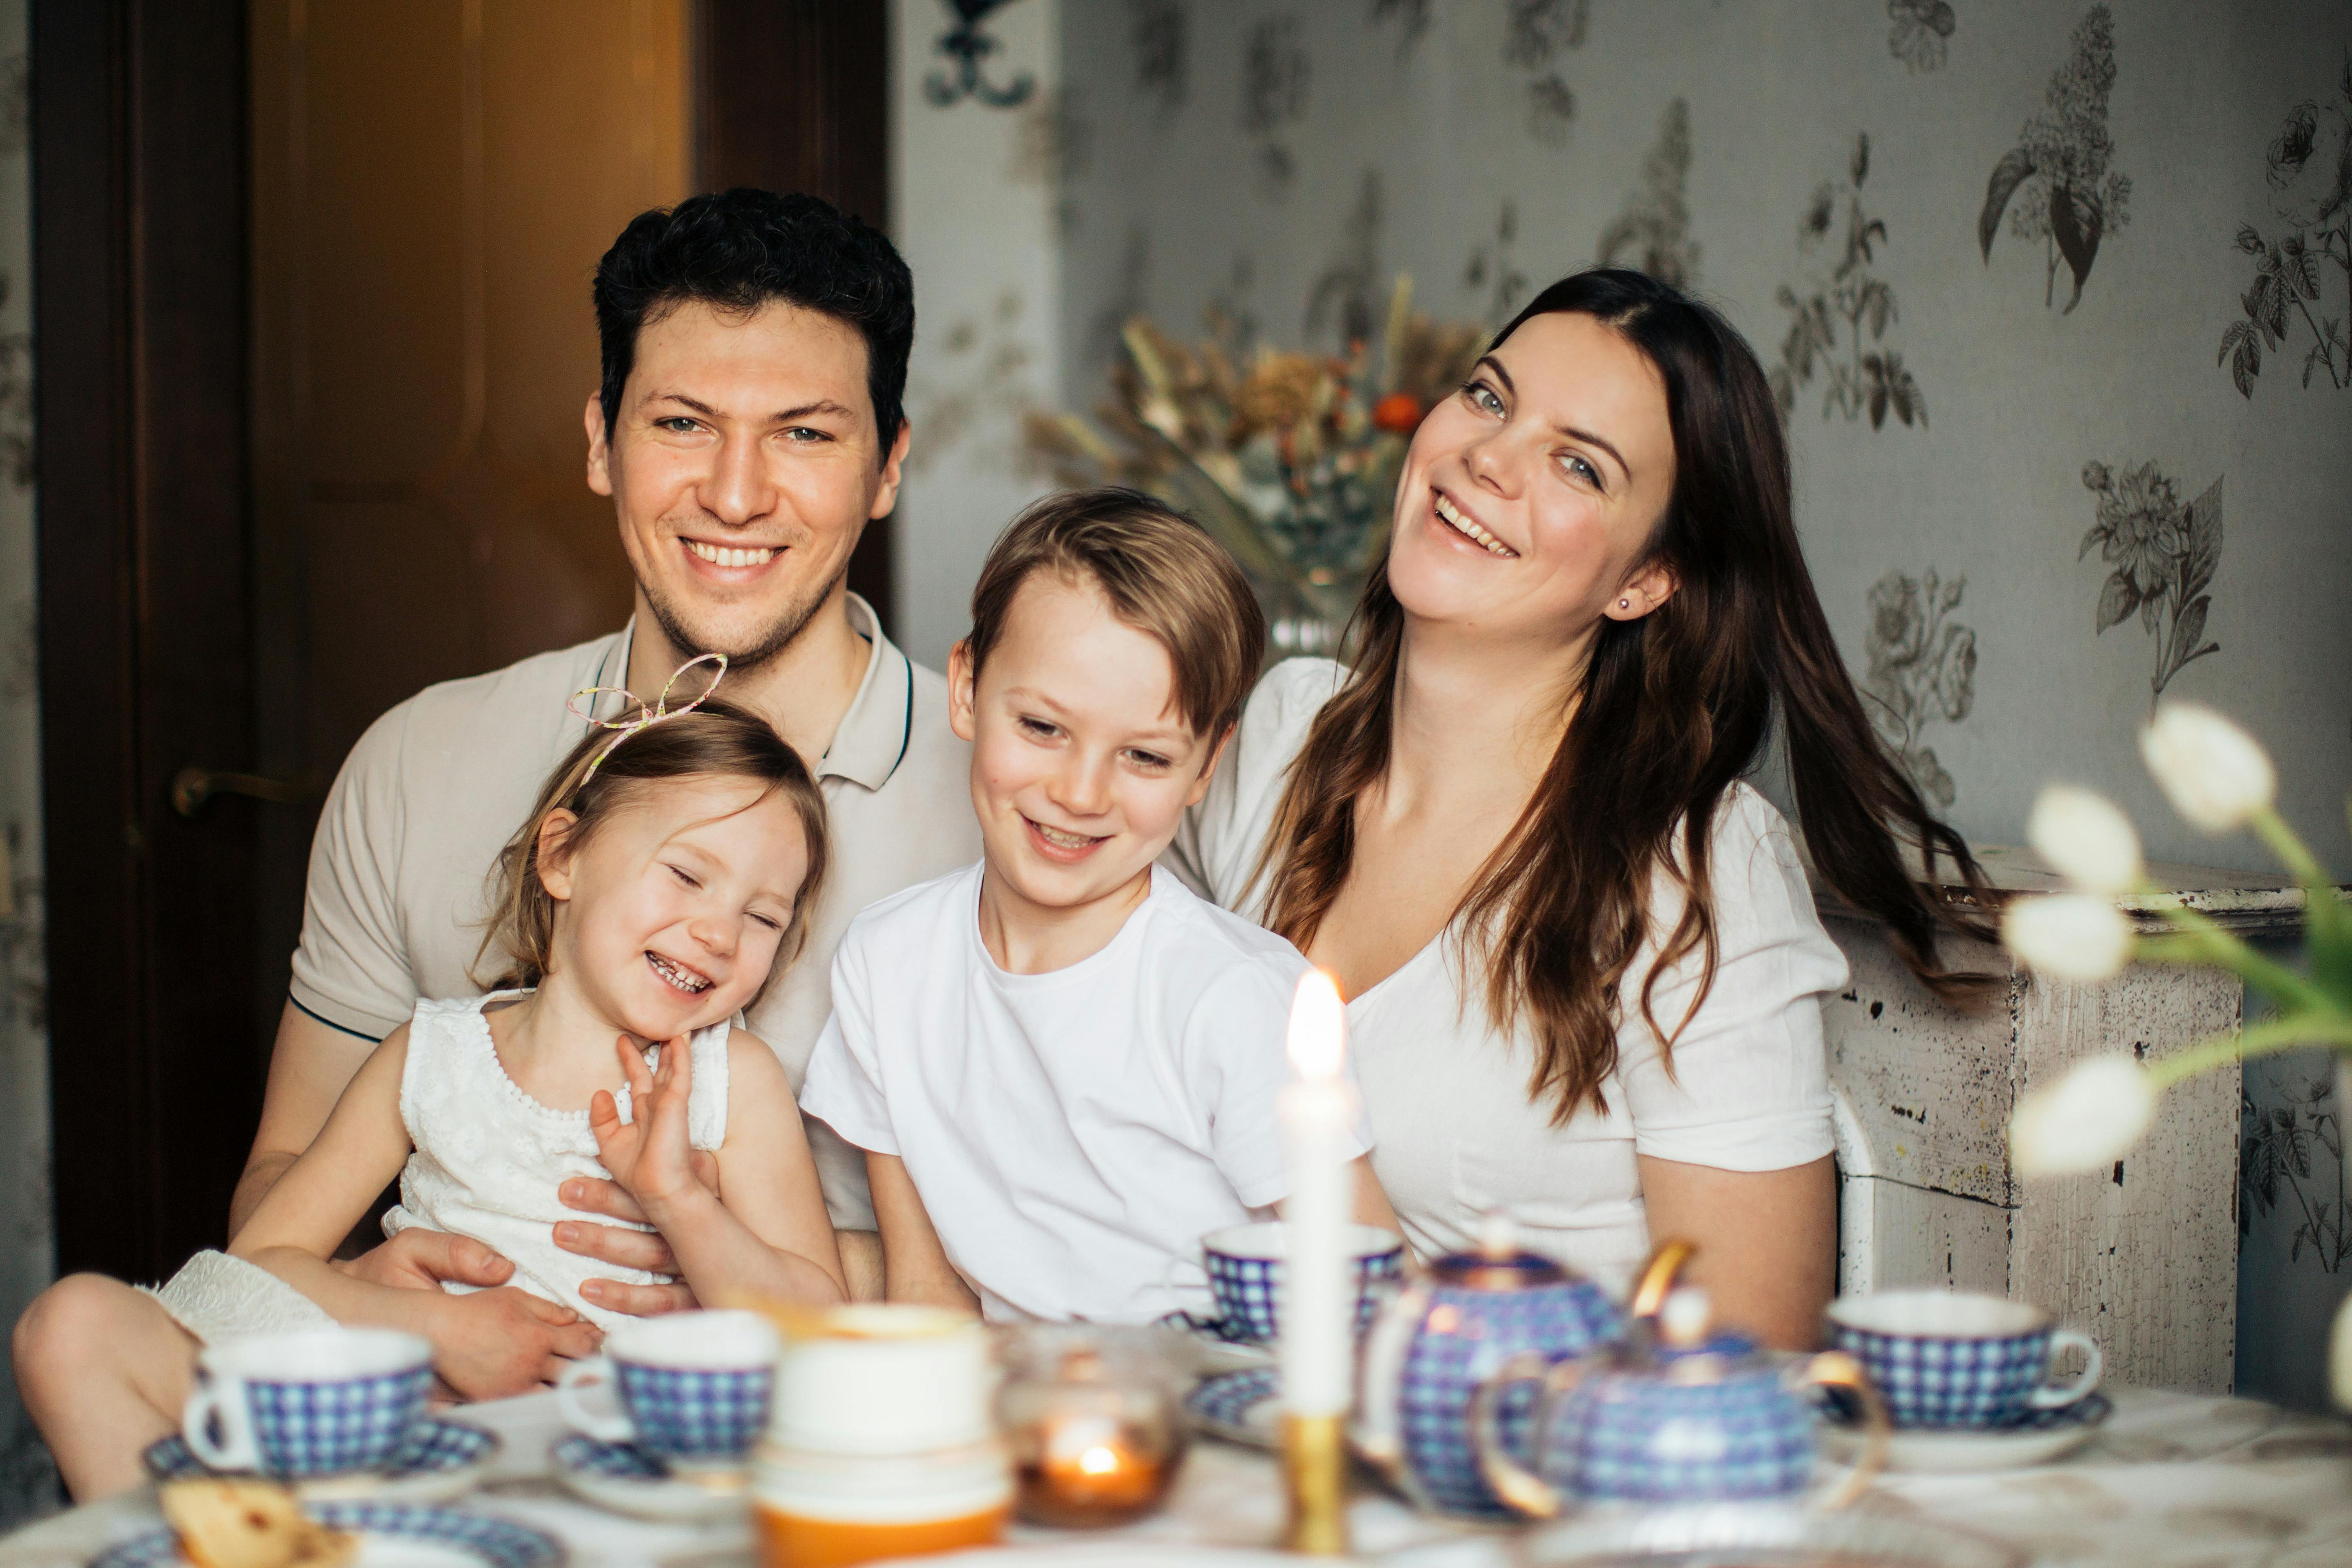 A happy household | Source: Pexels